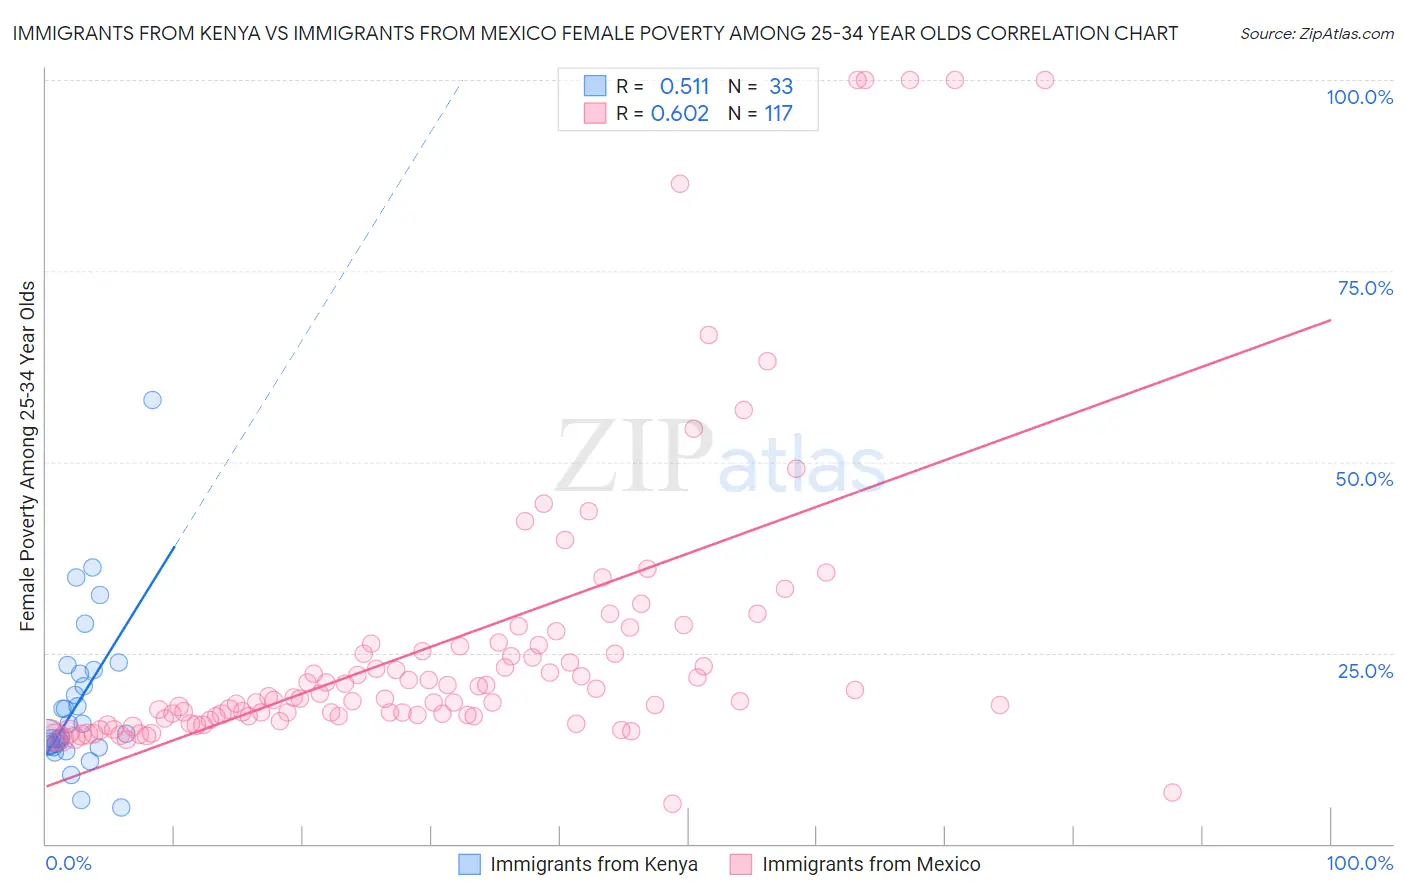 Immigrants from Kenya vs Immigrants from Mexico Female Poverty Among 25-34 Year Olds